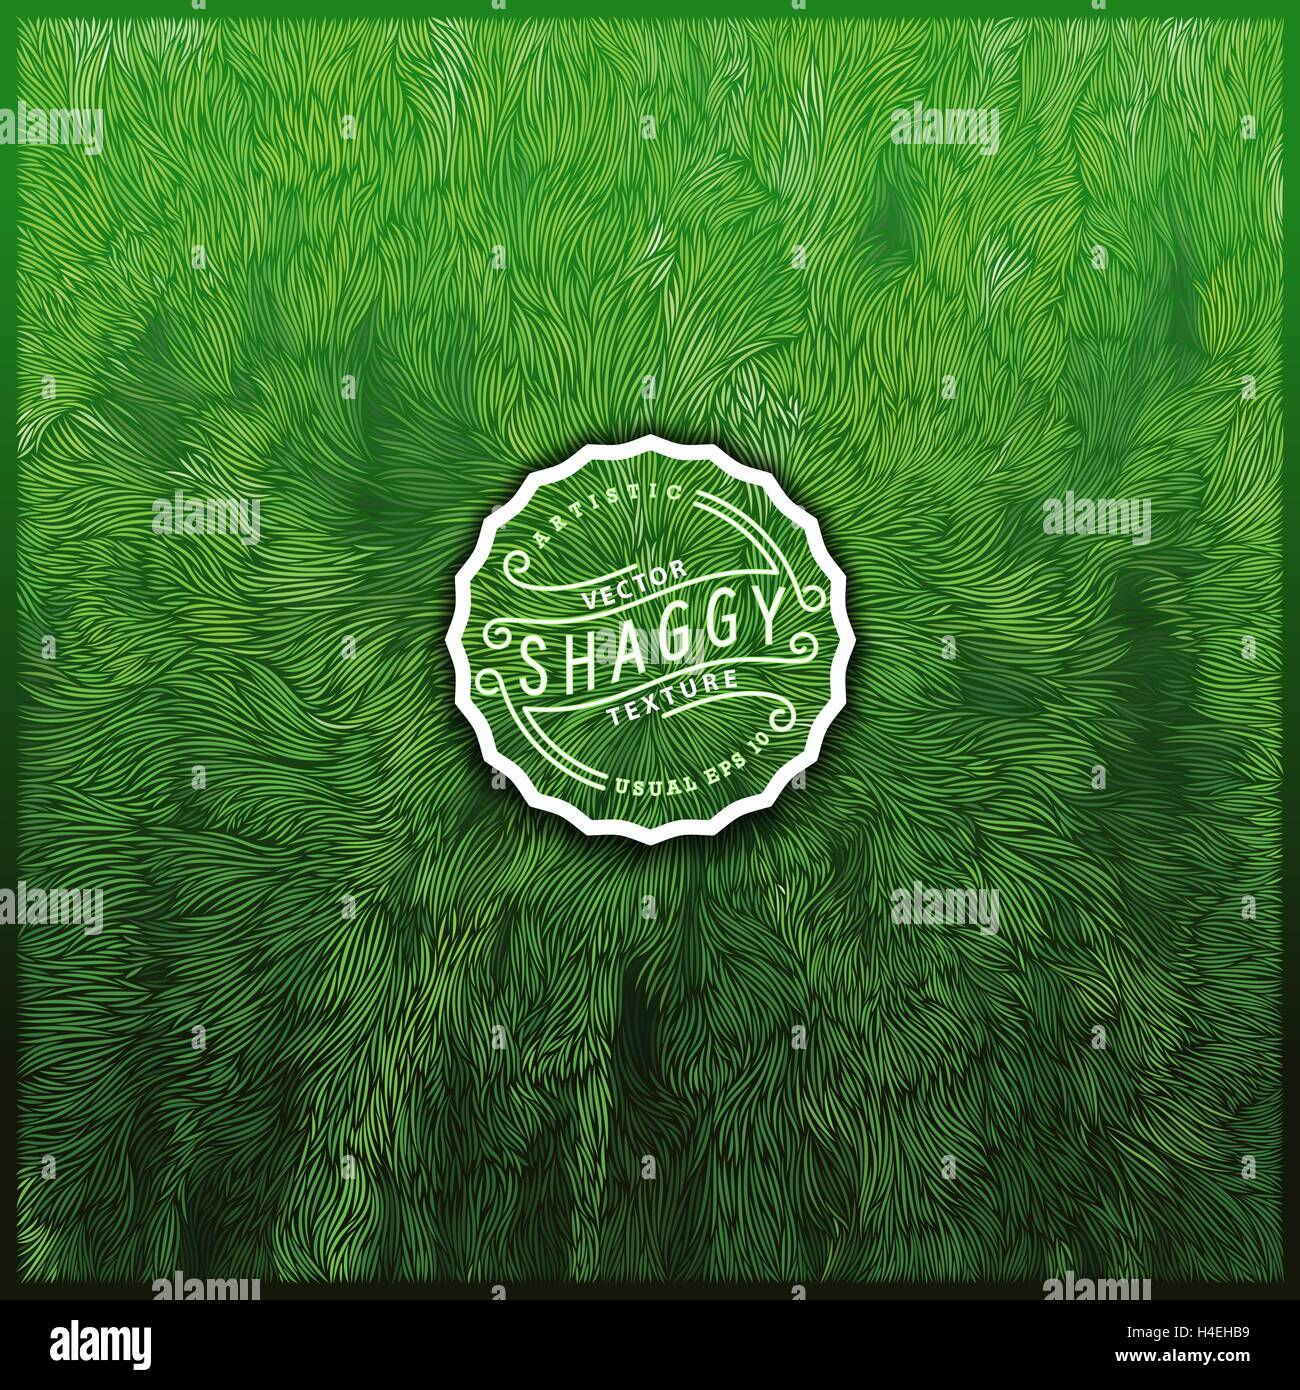 Artistic background Stock Vector